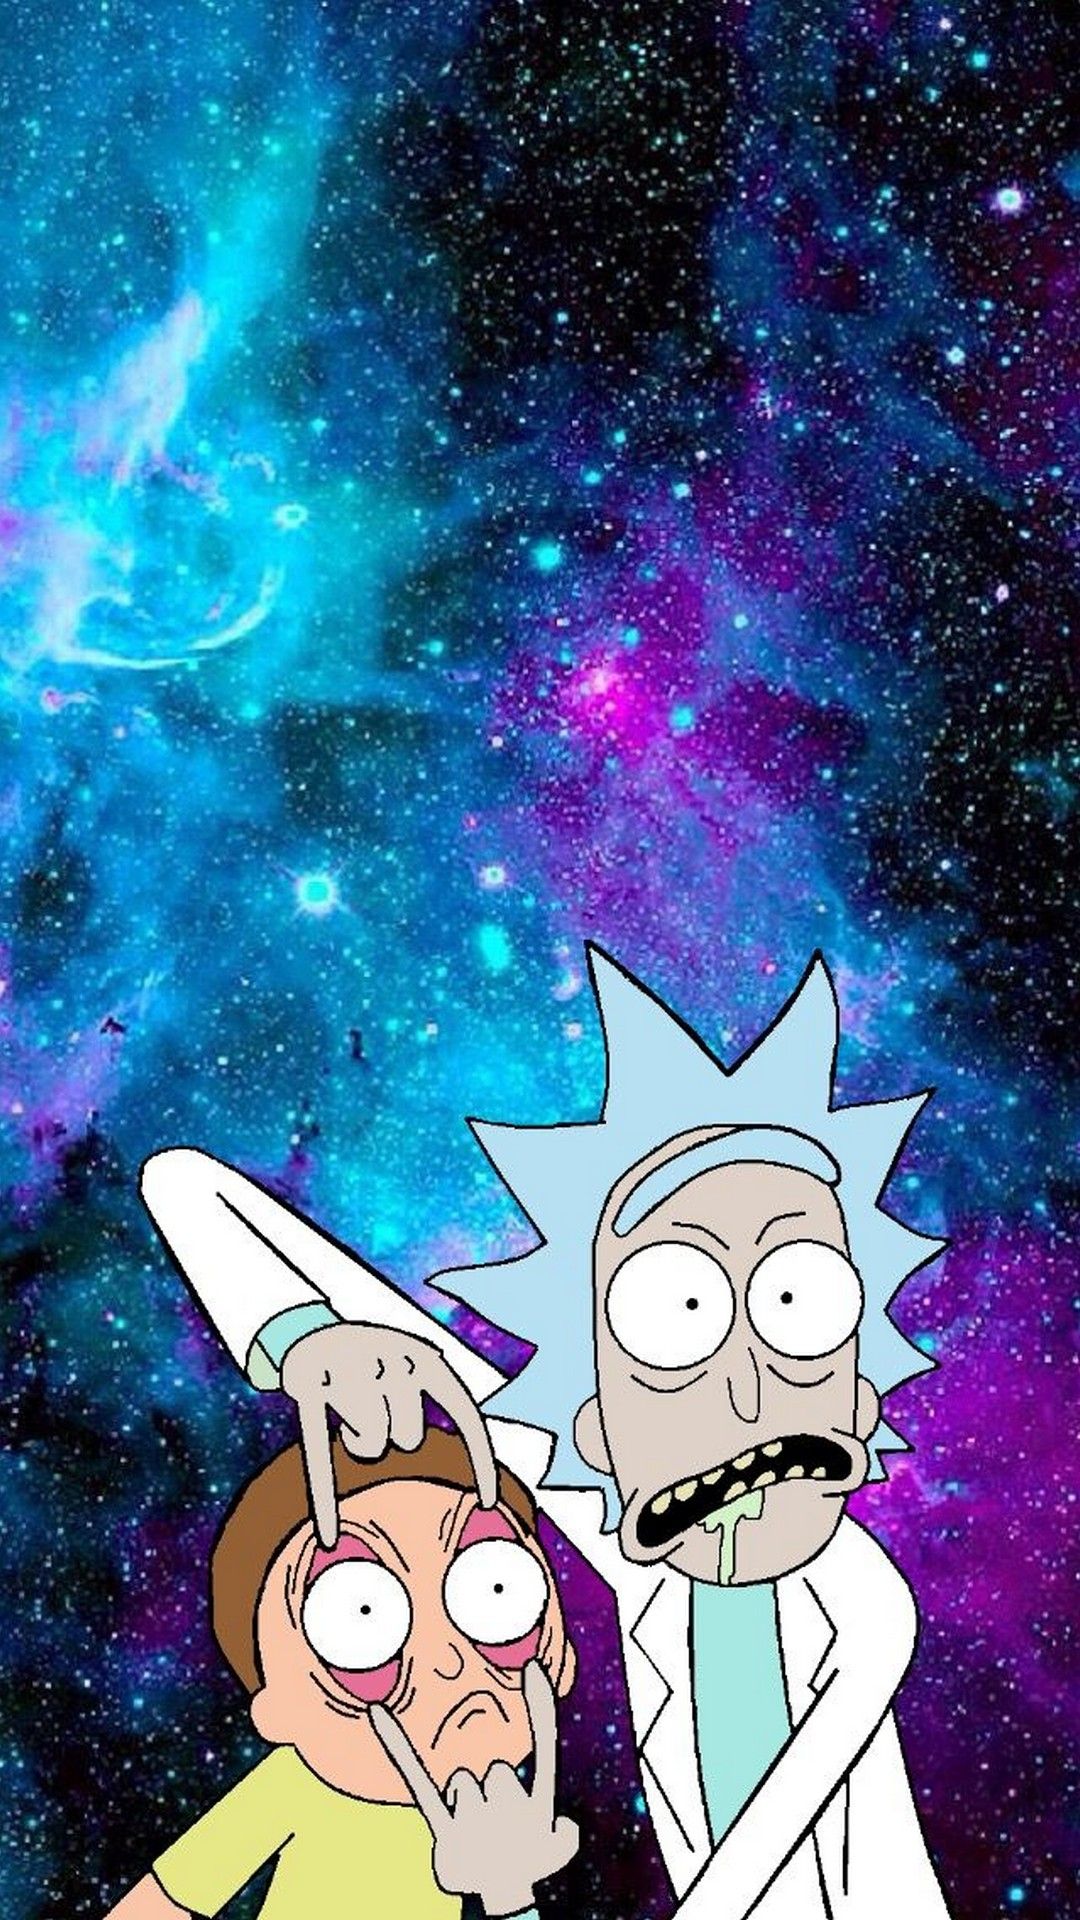 Rick And Morty Wallpapers HD for iPhone - PixelsTalk.Net